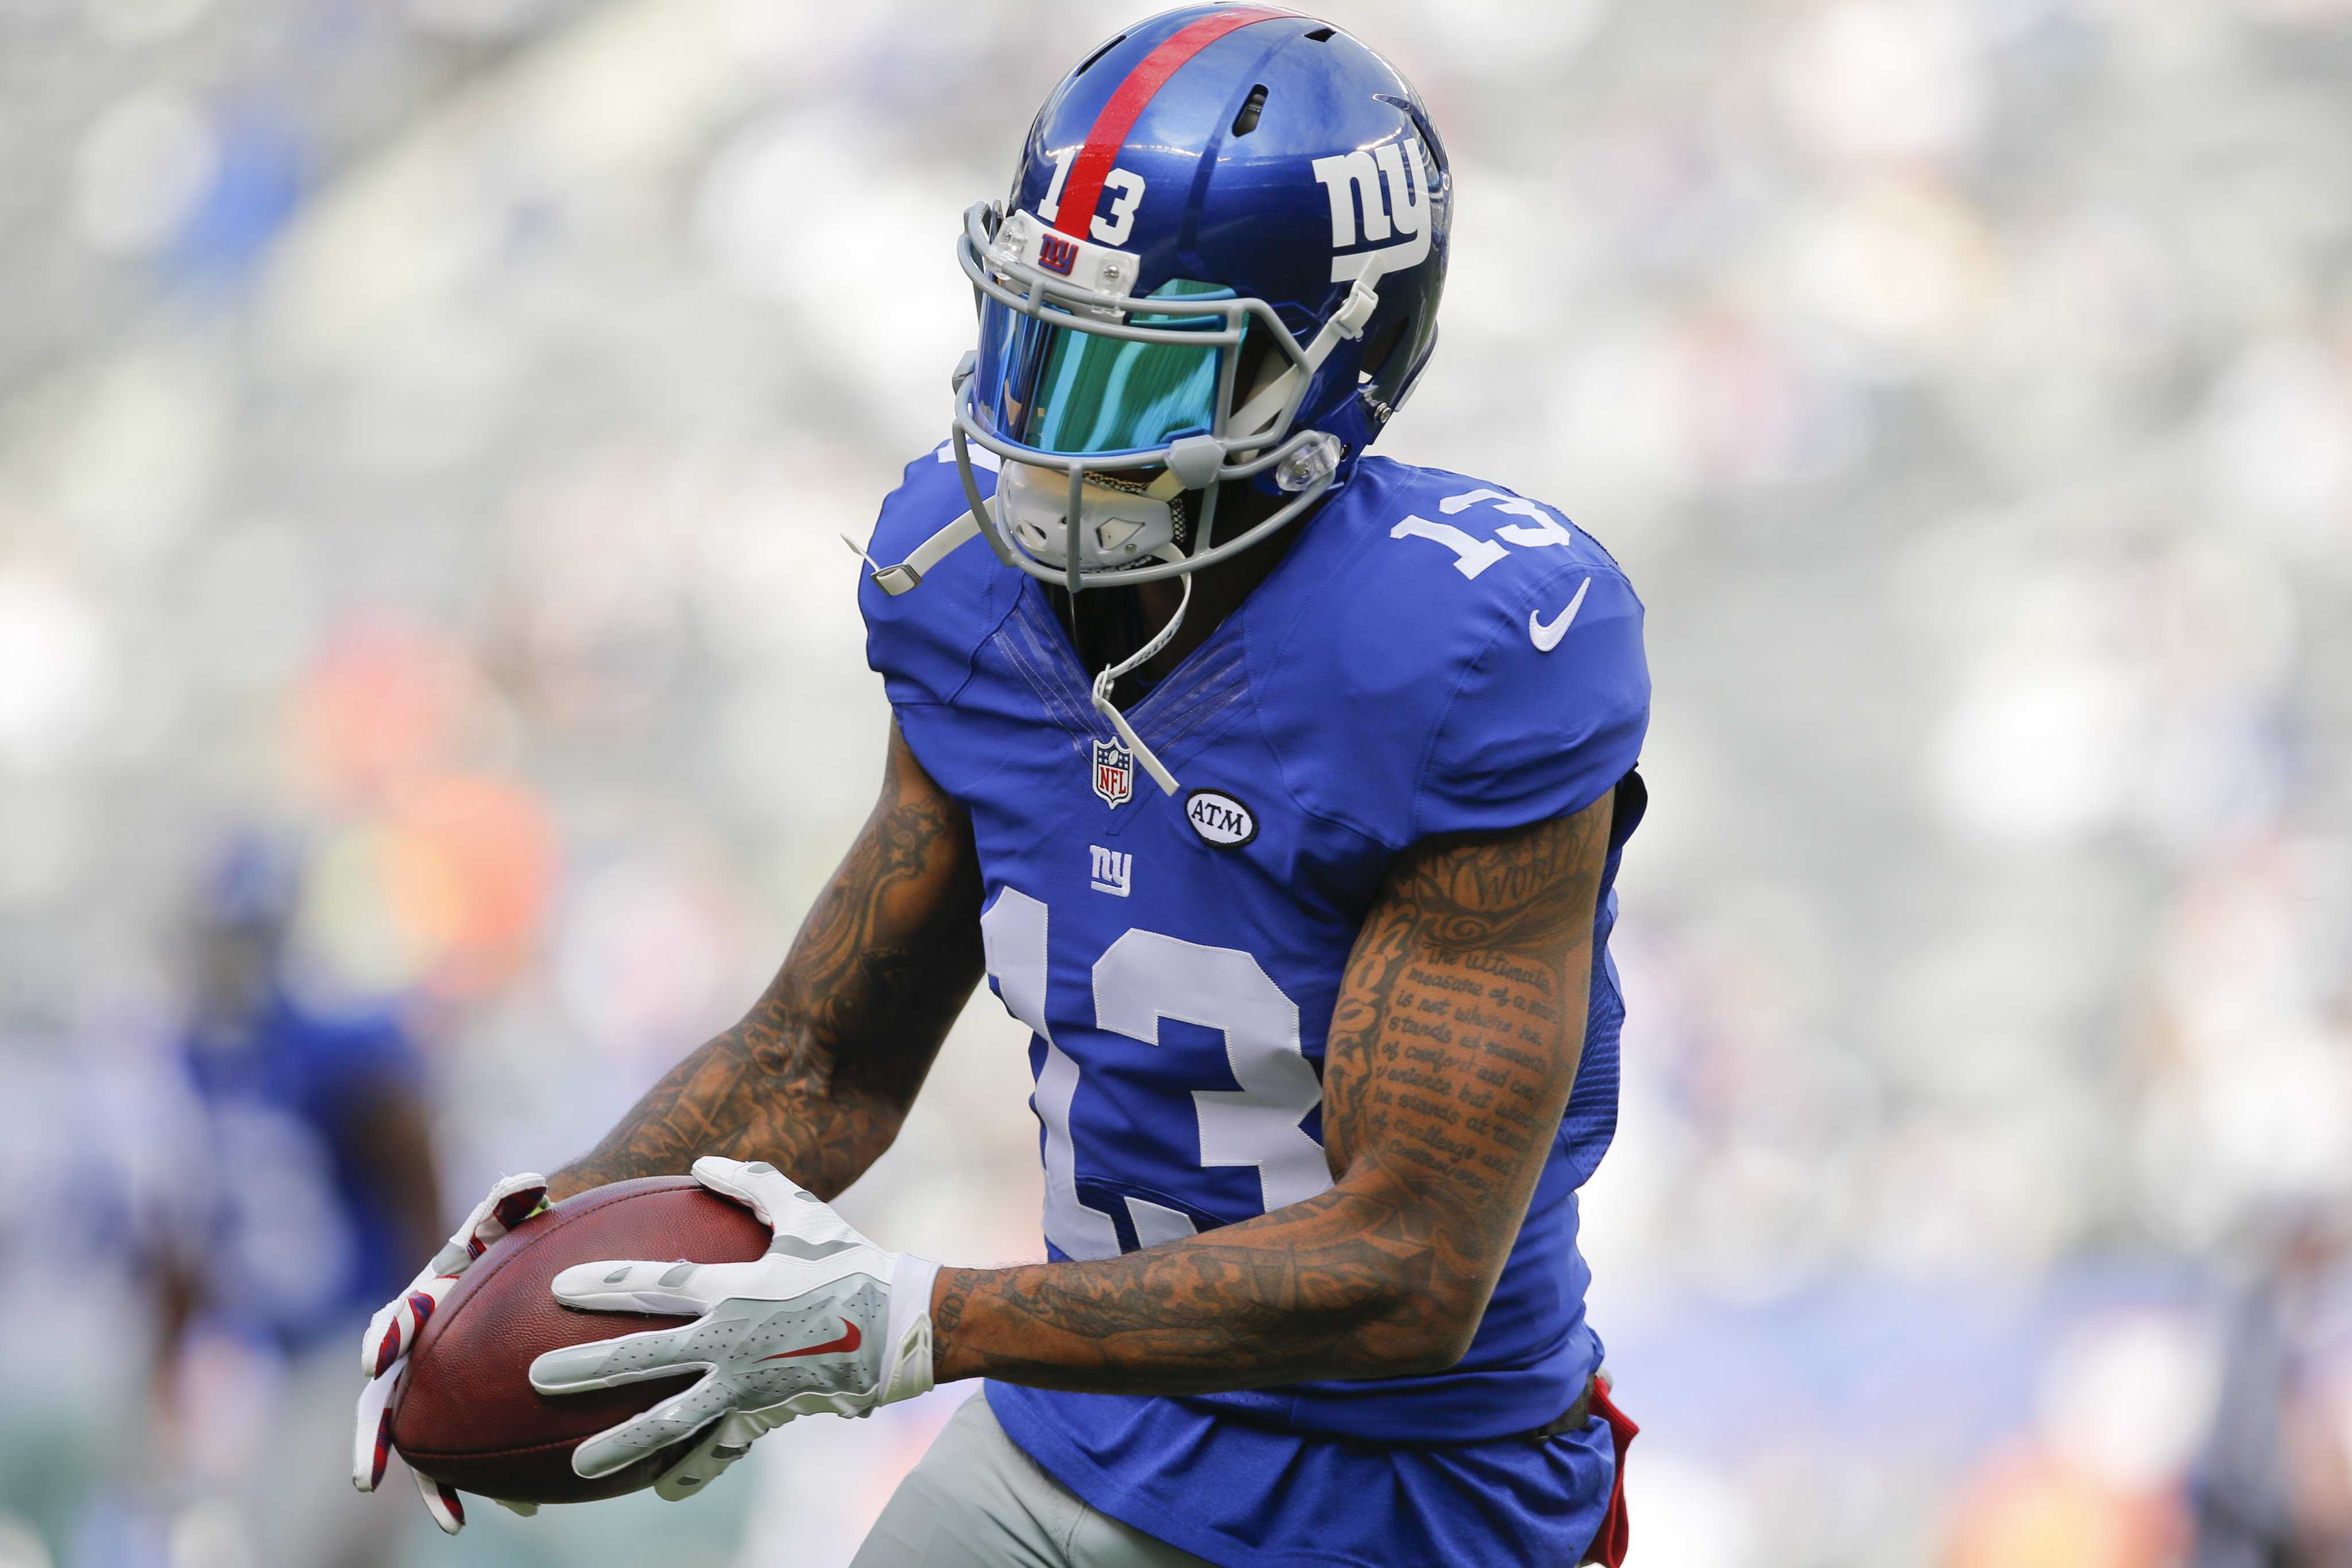 Odell Beckham Cool Wallpapers - Top Free Odell Beckham Cool Backgrounds